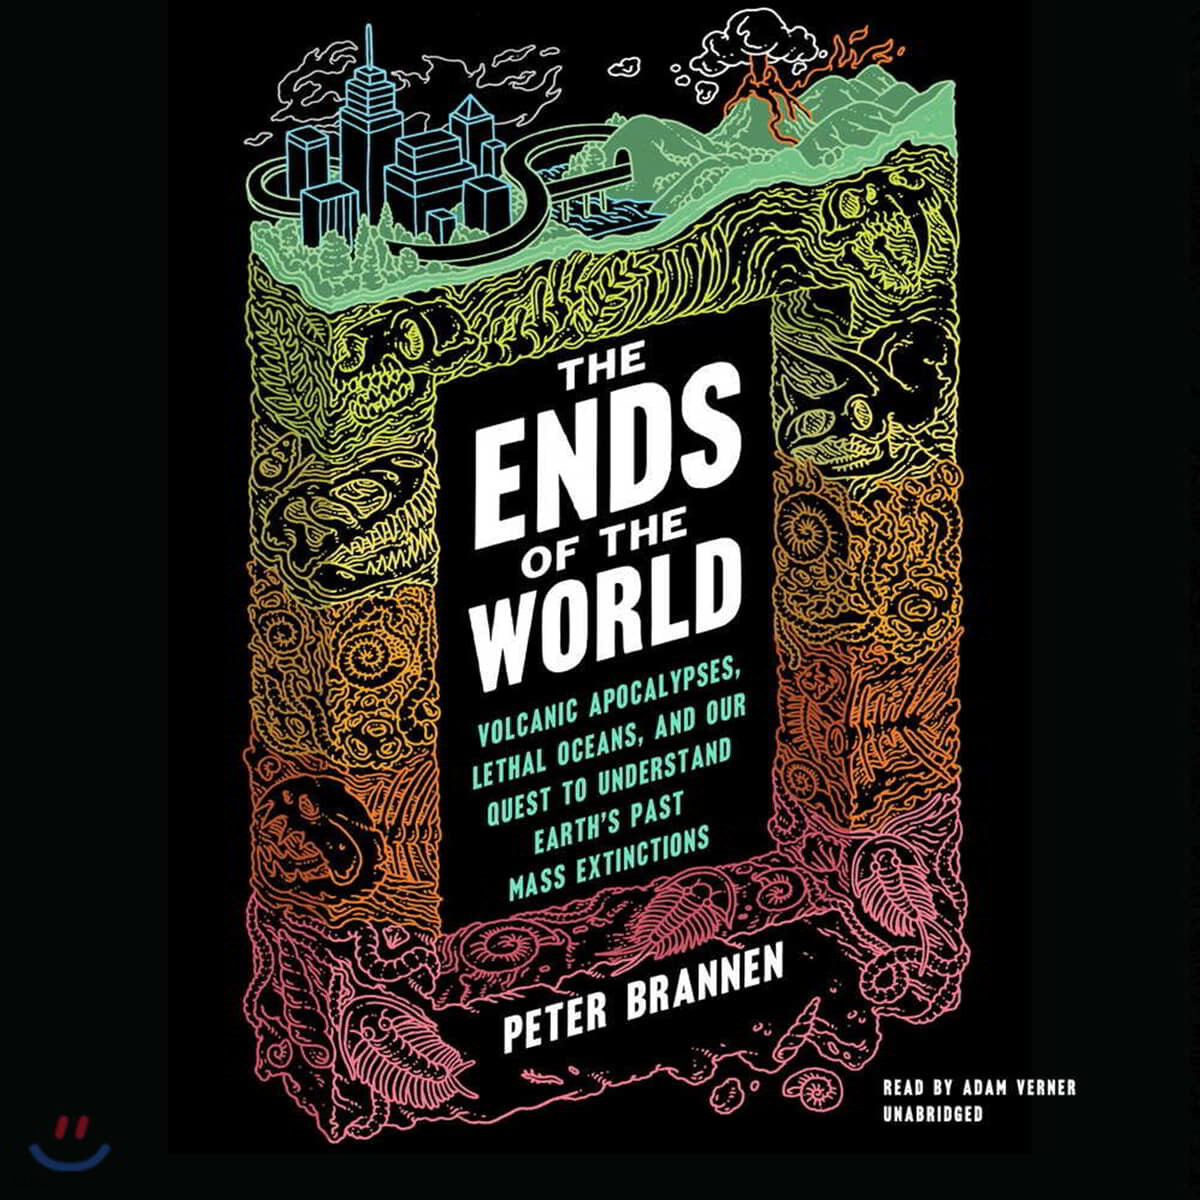 The Ends of the World Lib/E: Volcanic Apocalypses, Lethal Oceans, and Our Quest to Understand Earth's Past Mass Extinctions